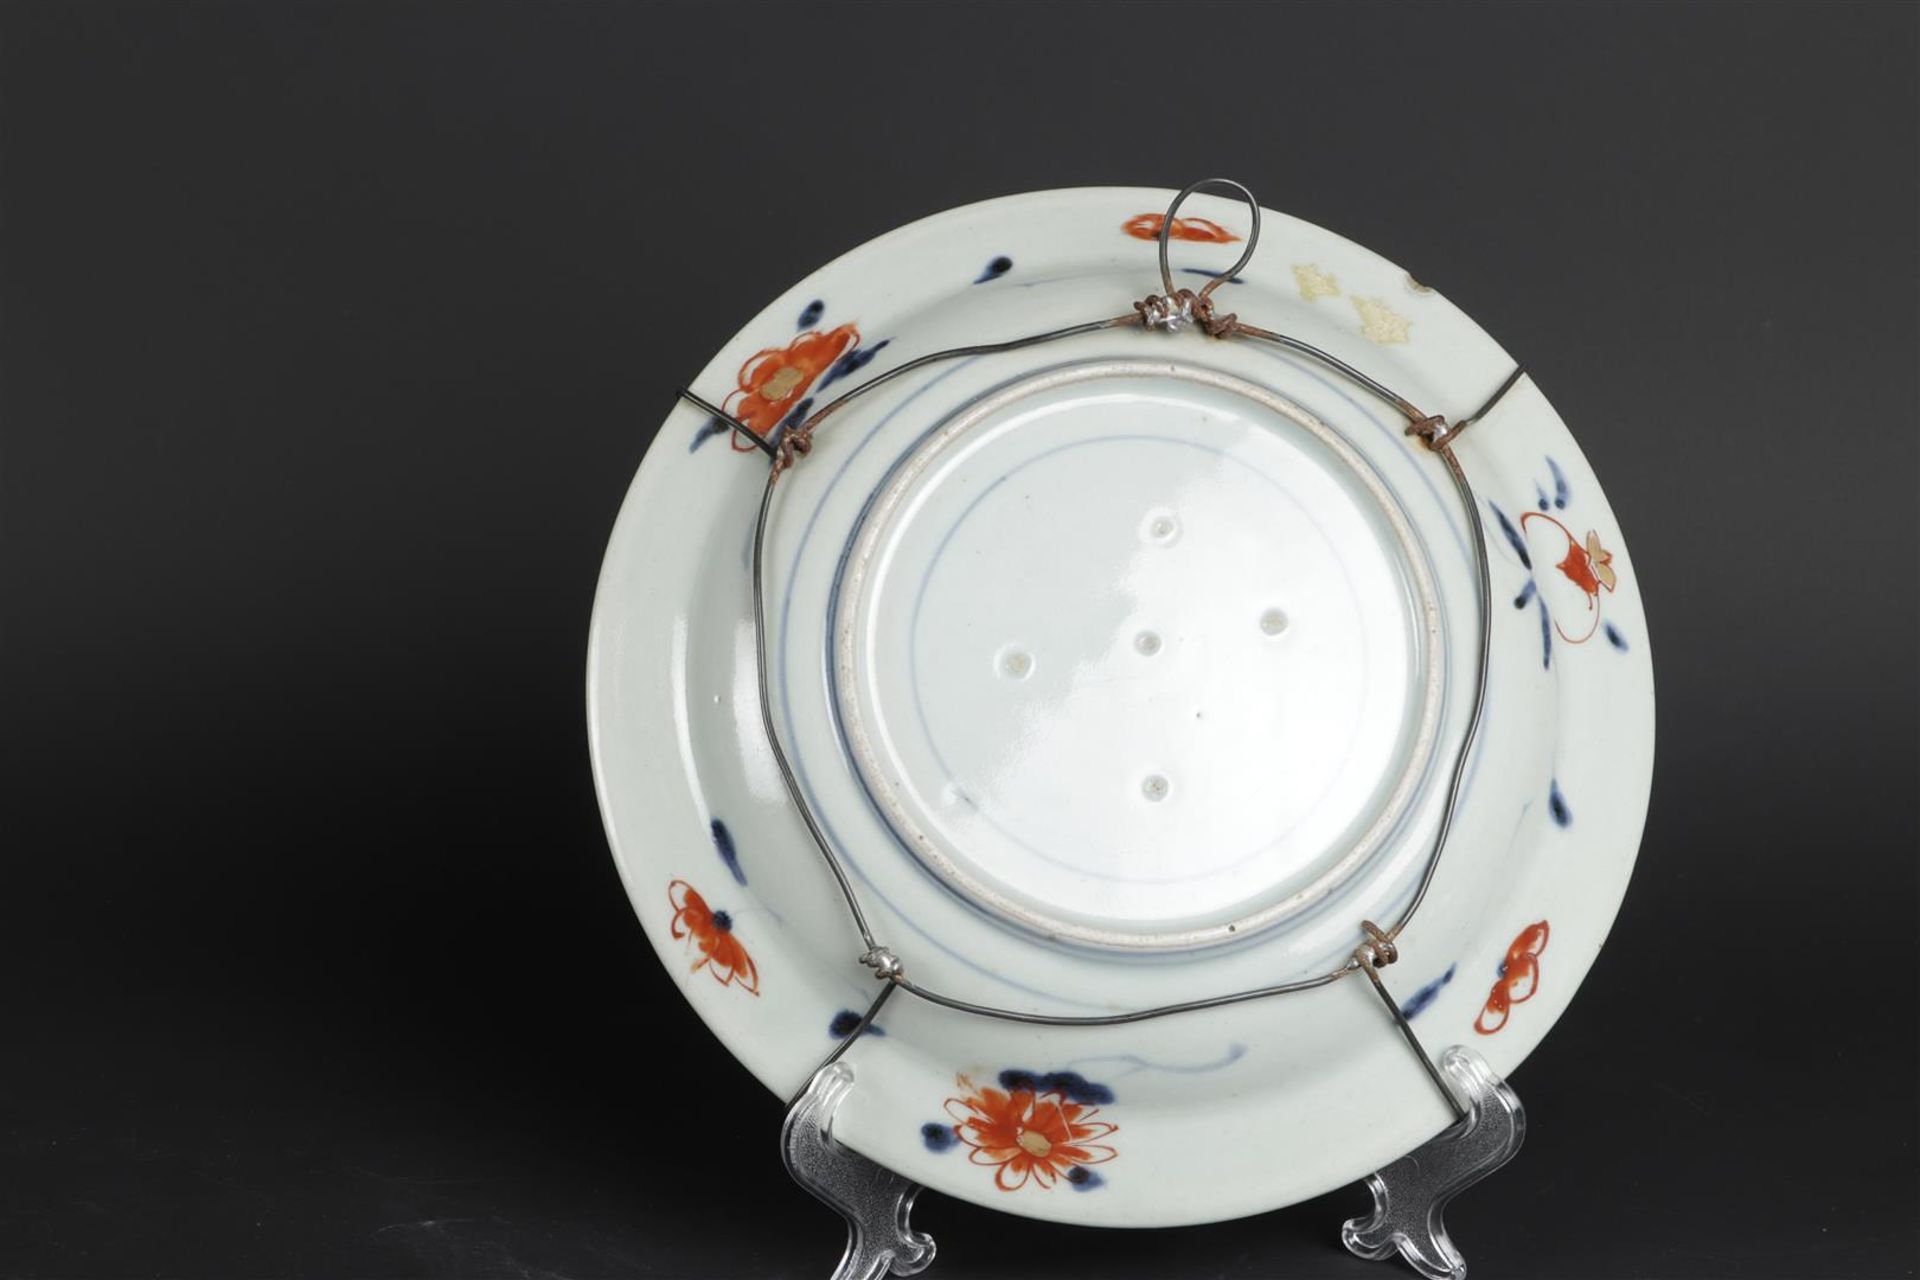 A porcelain Imari plate with a handle basket decor and a border outside. Japanese, early 18th centur - Image 2 of 2